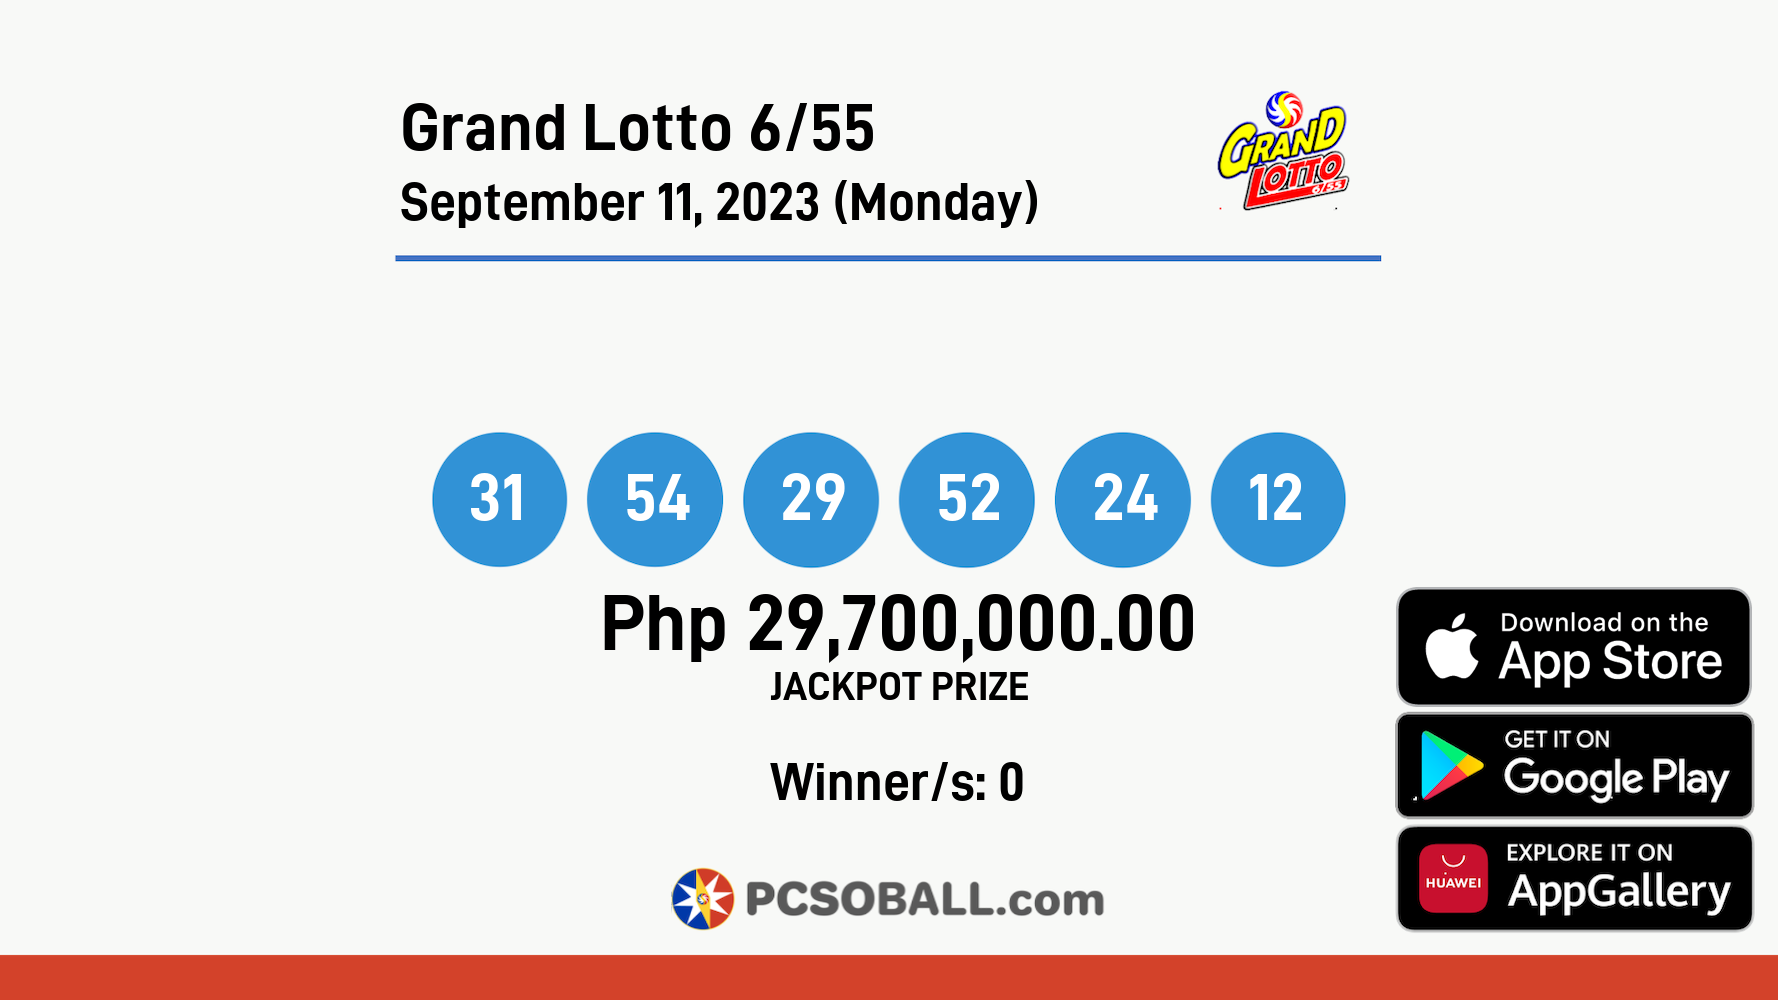 Grand Lotto 6/55 September 11, 2023 (Monday) Result